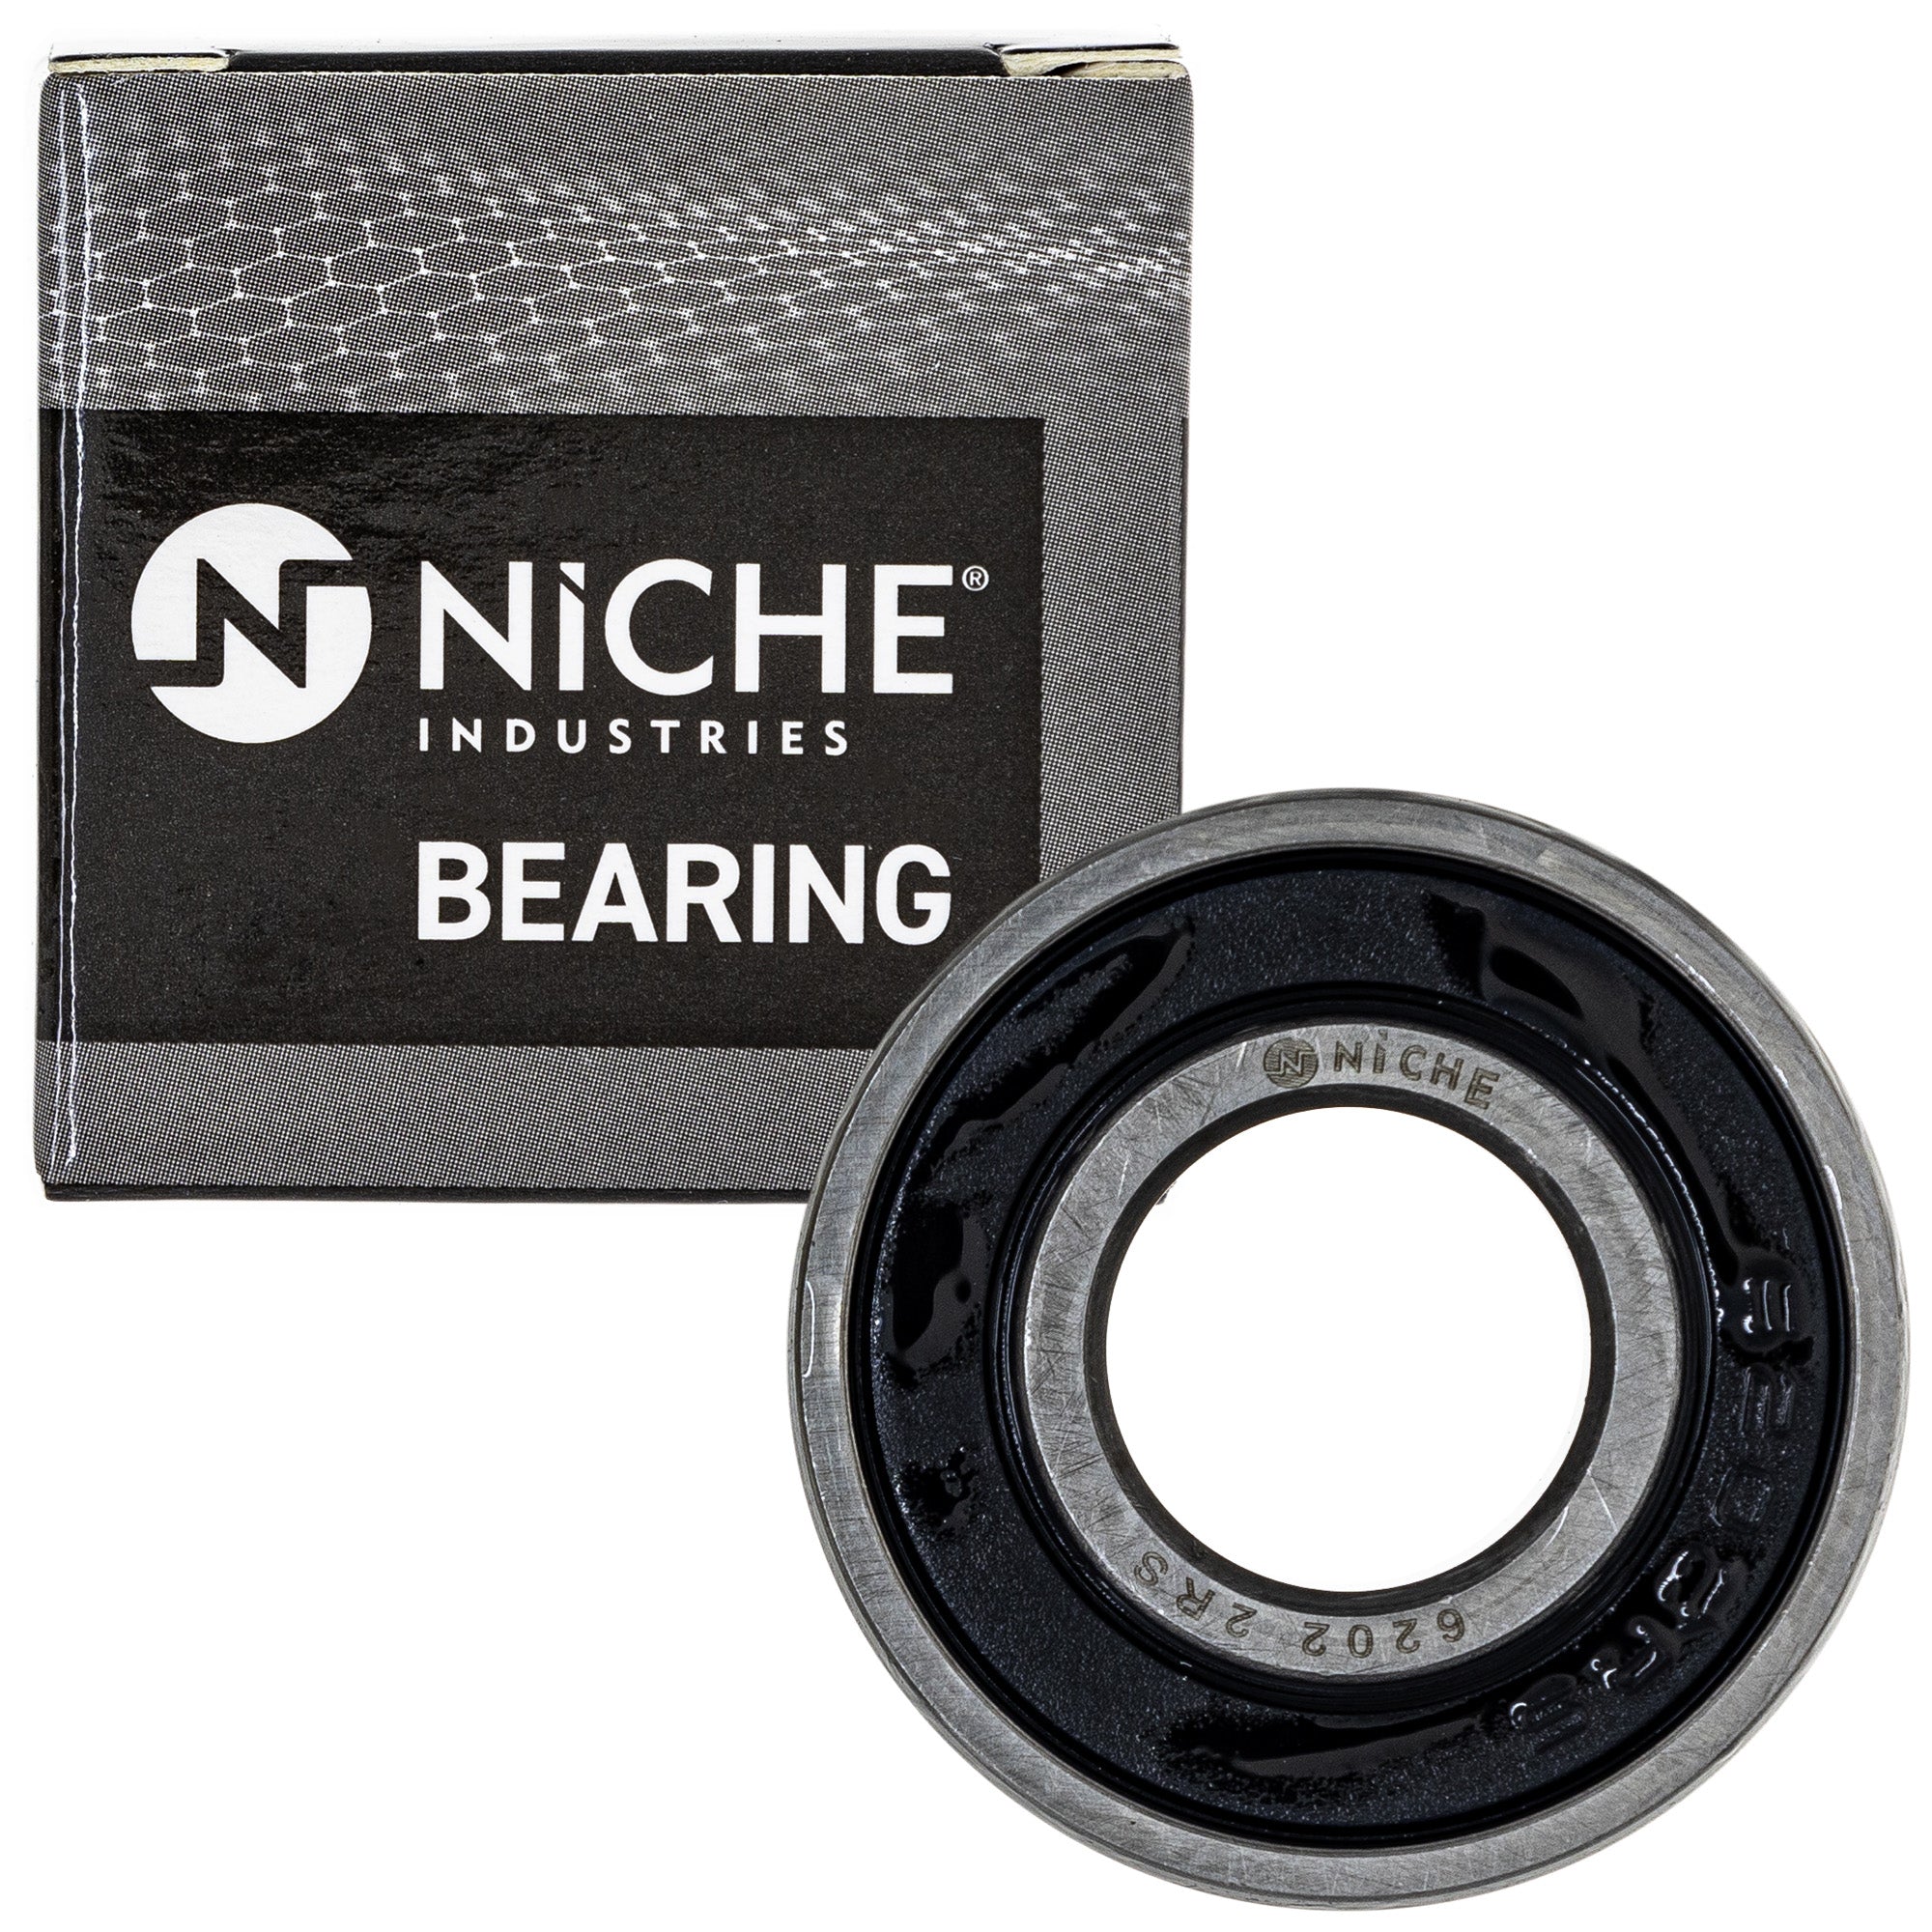 NICHE MK1008713 Wheel Bearing Seal Kit for zOTHER Ref No XT250